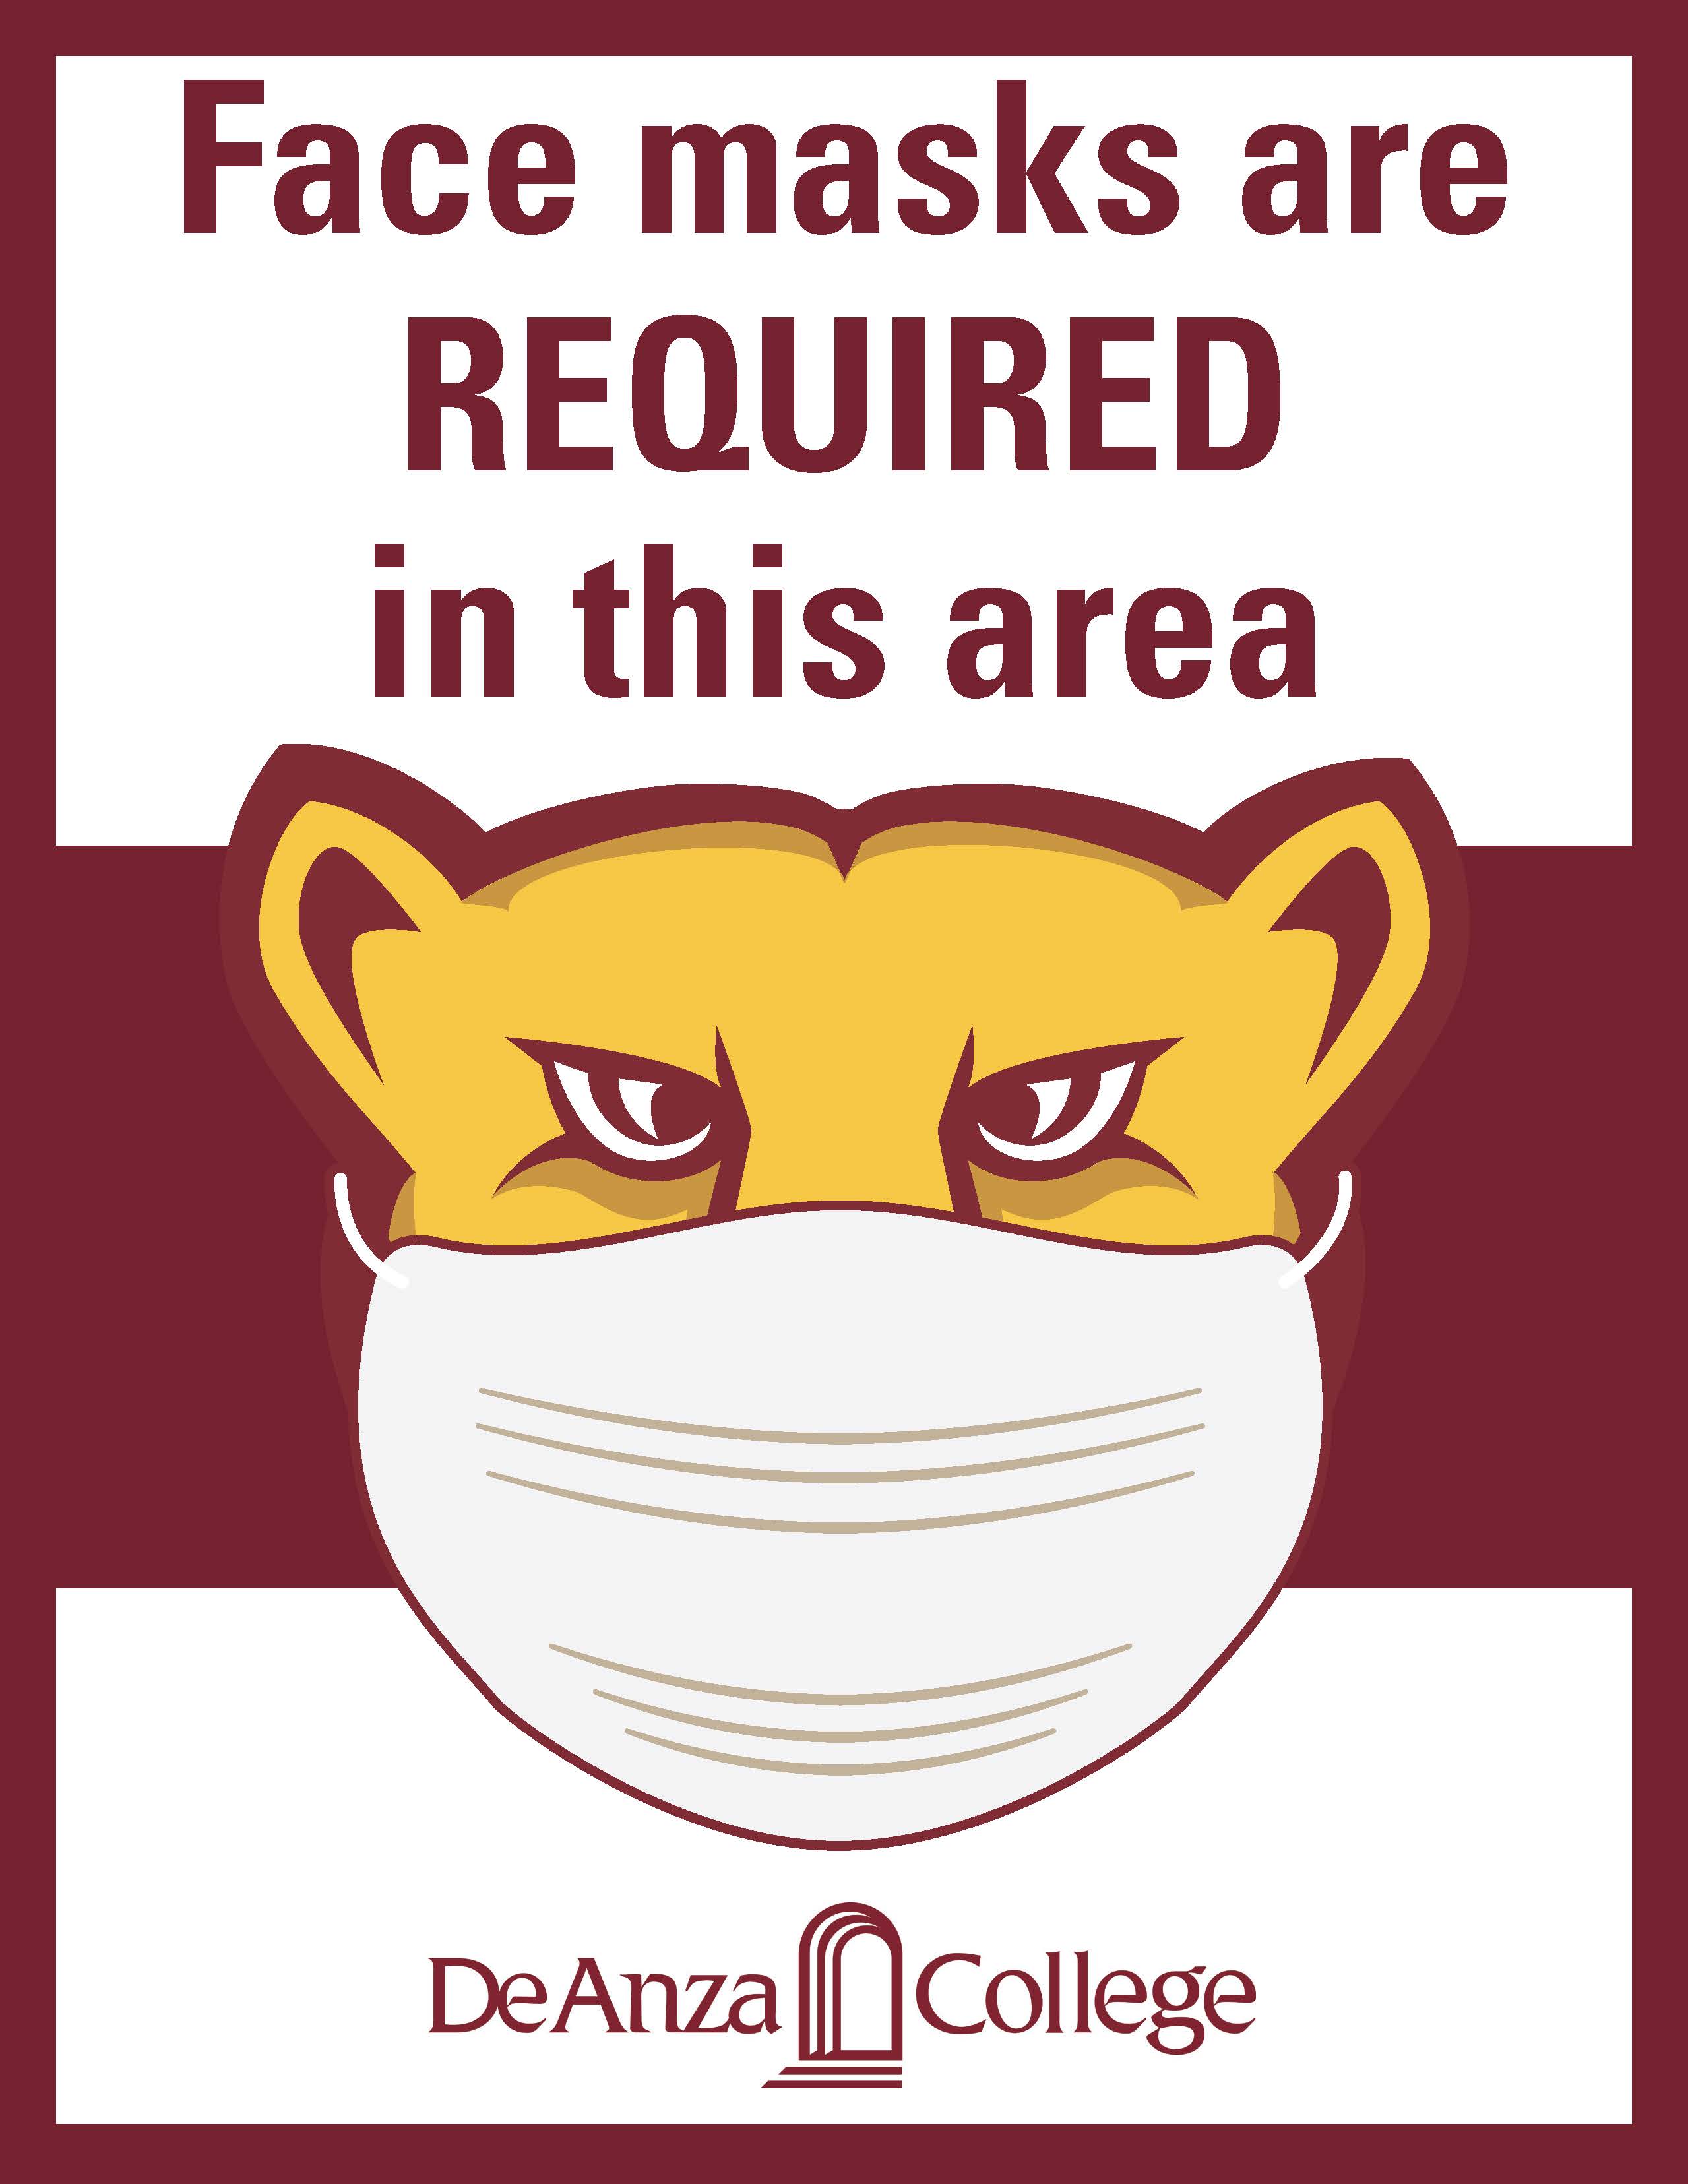 Face masks are REQUIRED in this area (Mountain lion)